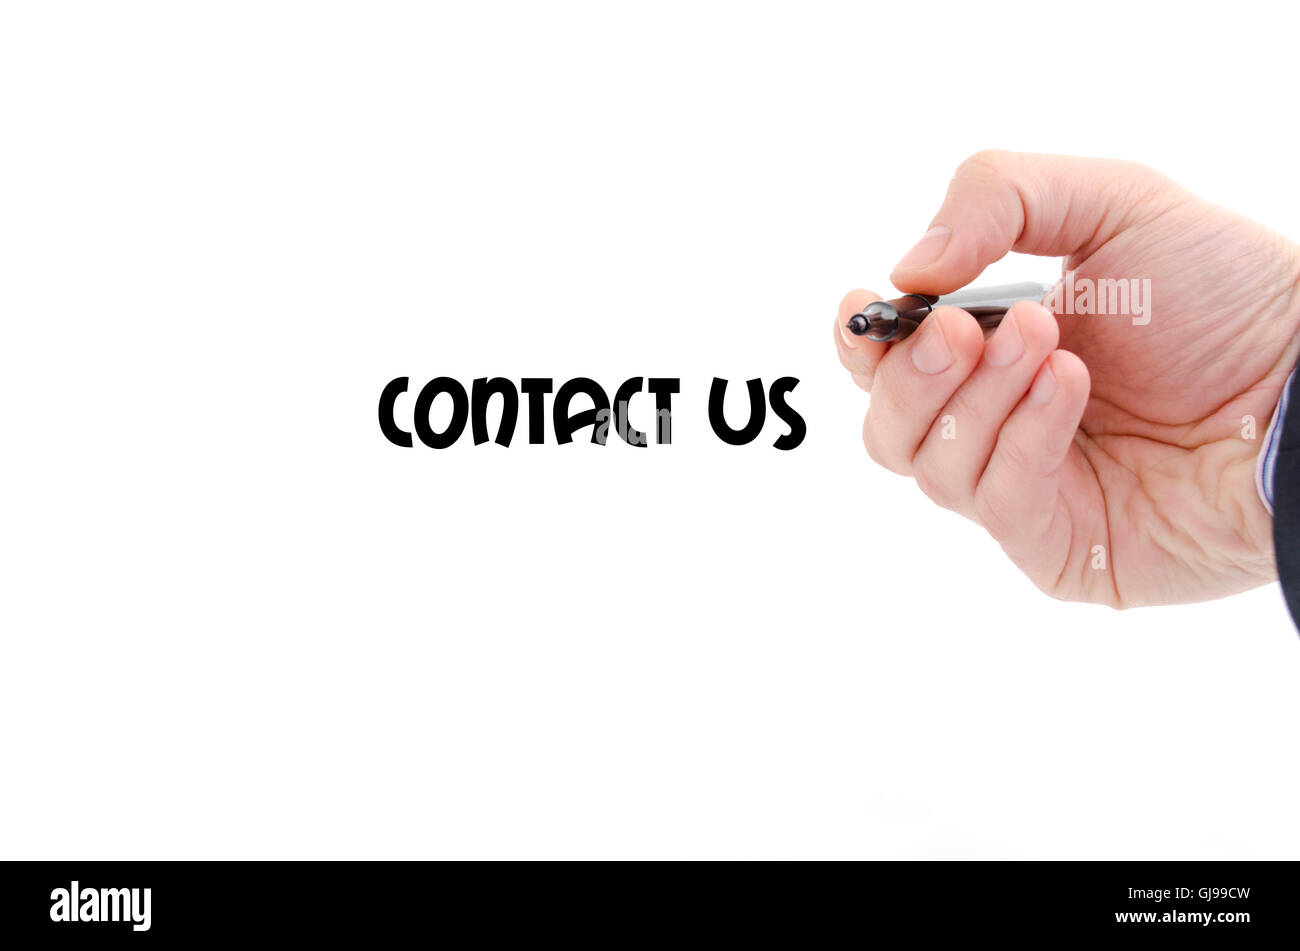 Contact us text concept isolated over white background Stock Photo